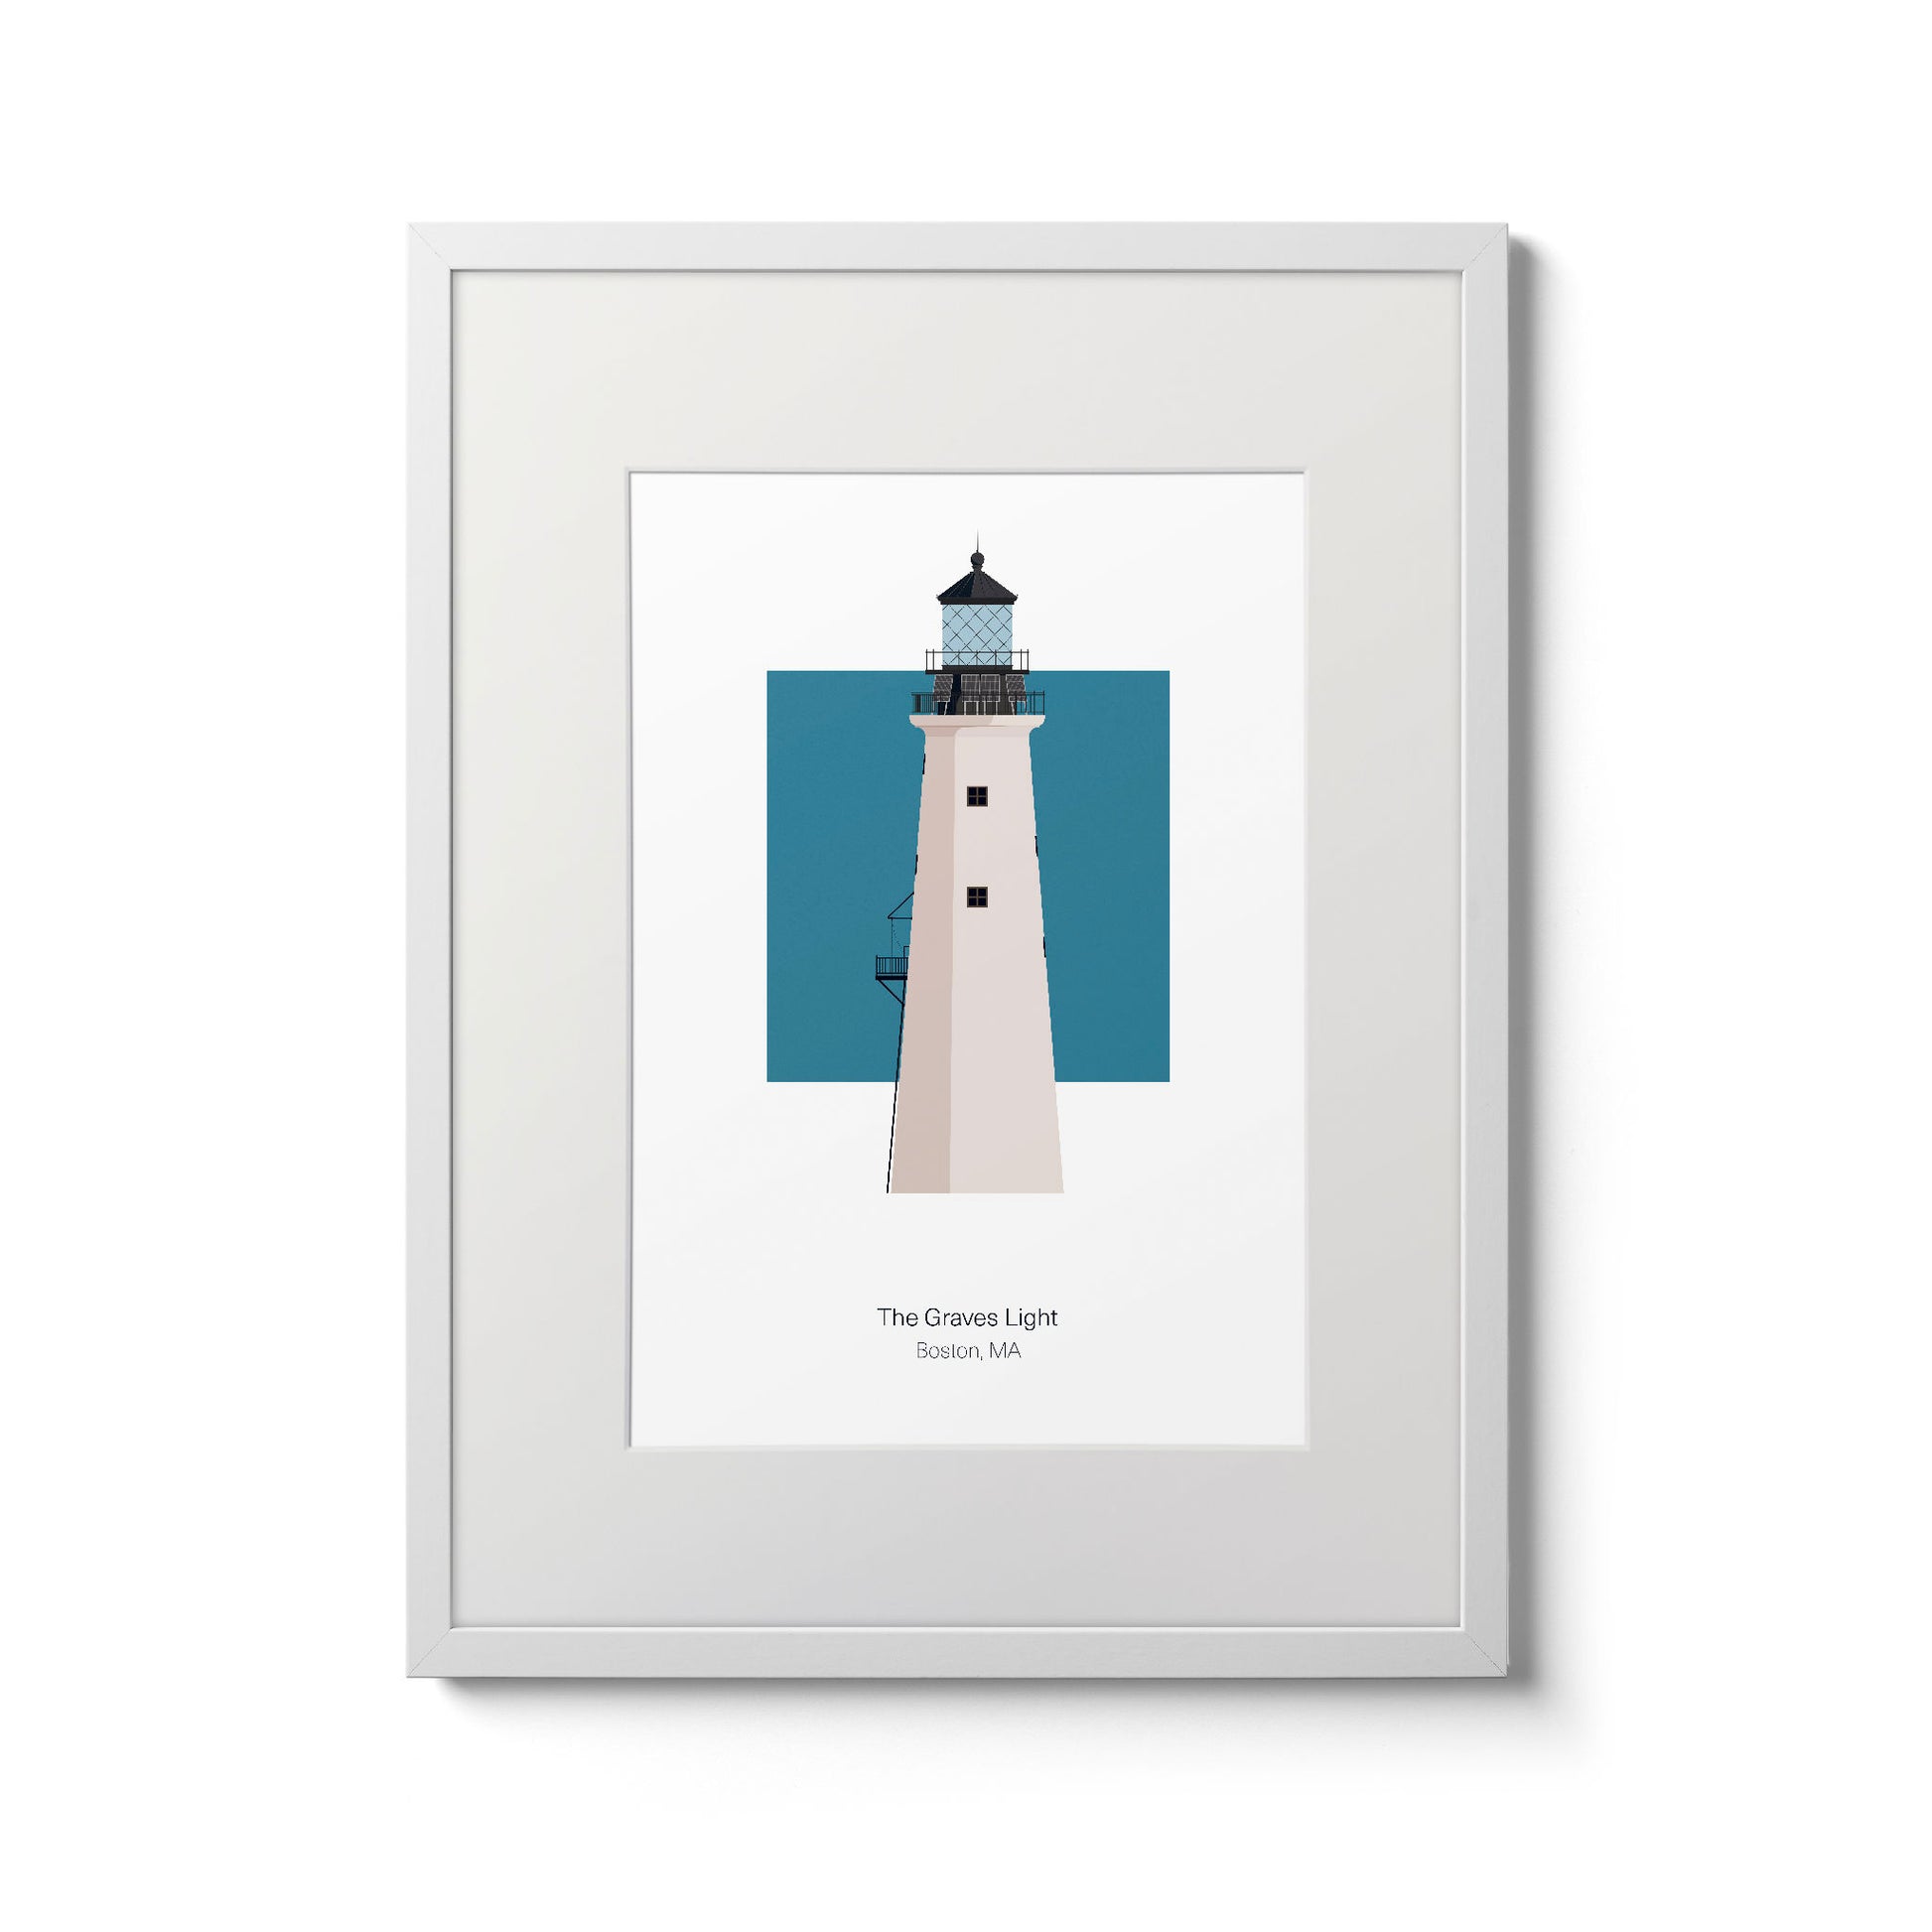 Illustration of the The Graves lighthouse, MA, USA. On a white background with aqua blue square as a backdrop., in a white frame  and measuring 11"x14" (30x40cm).